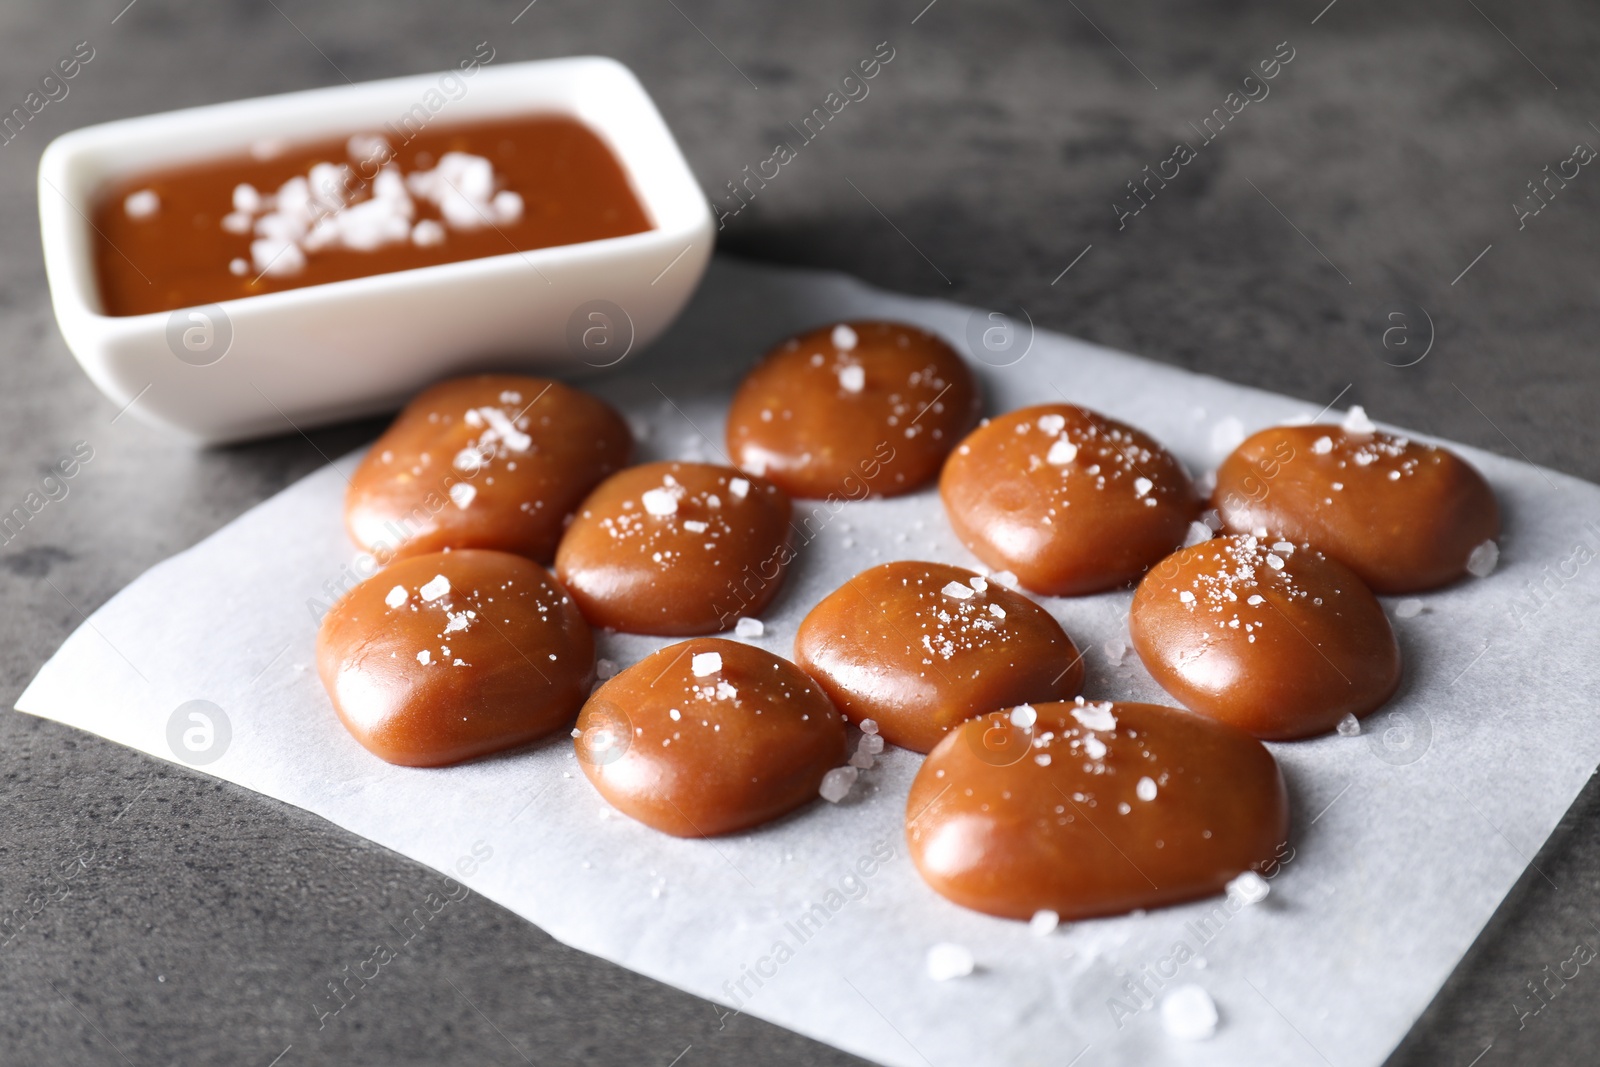 Photo of Tasty candies, caramel sauce and salt on grey table